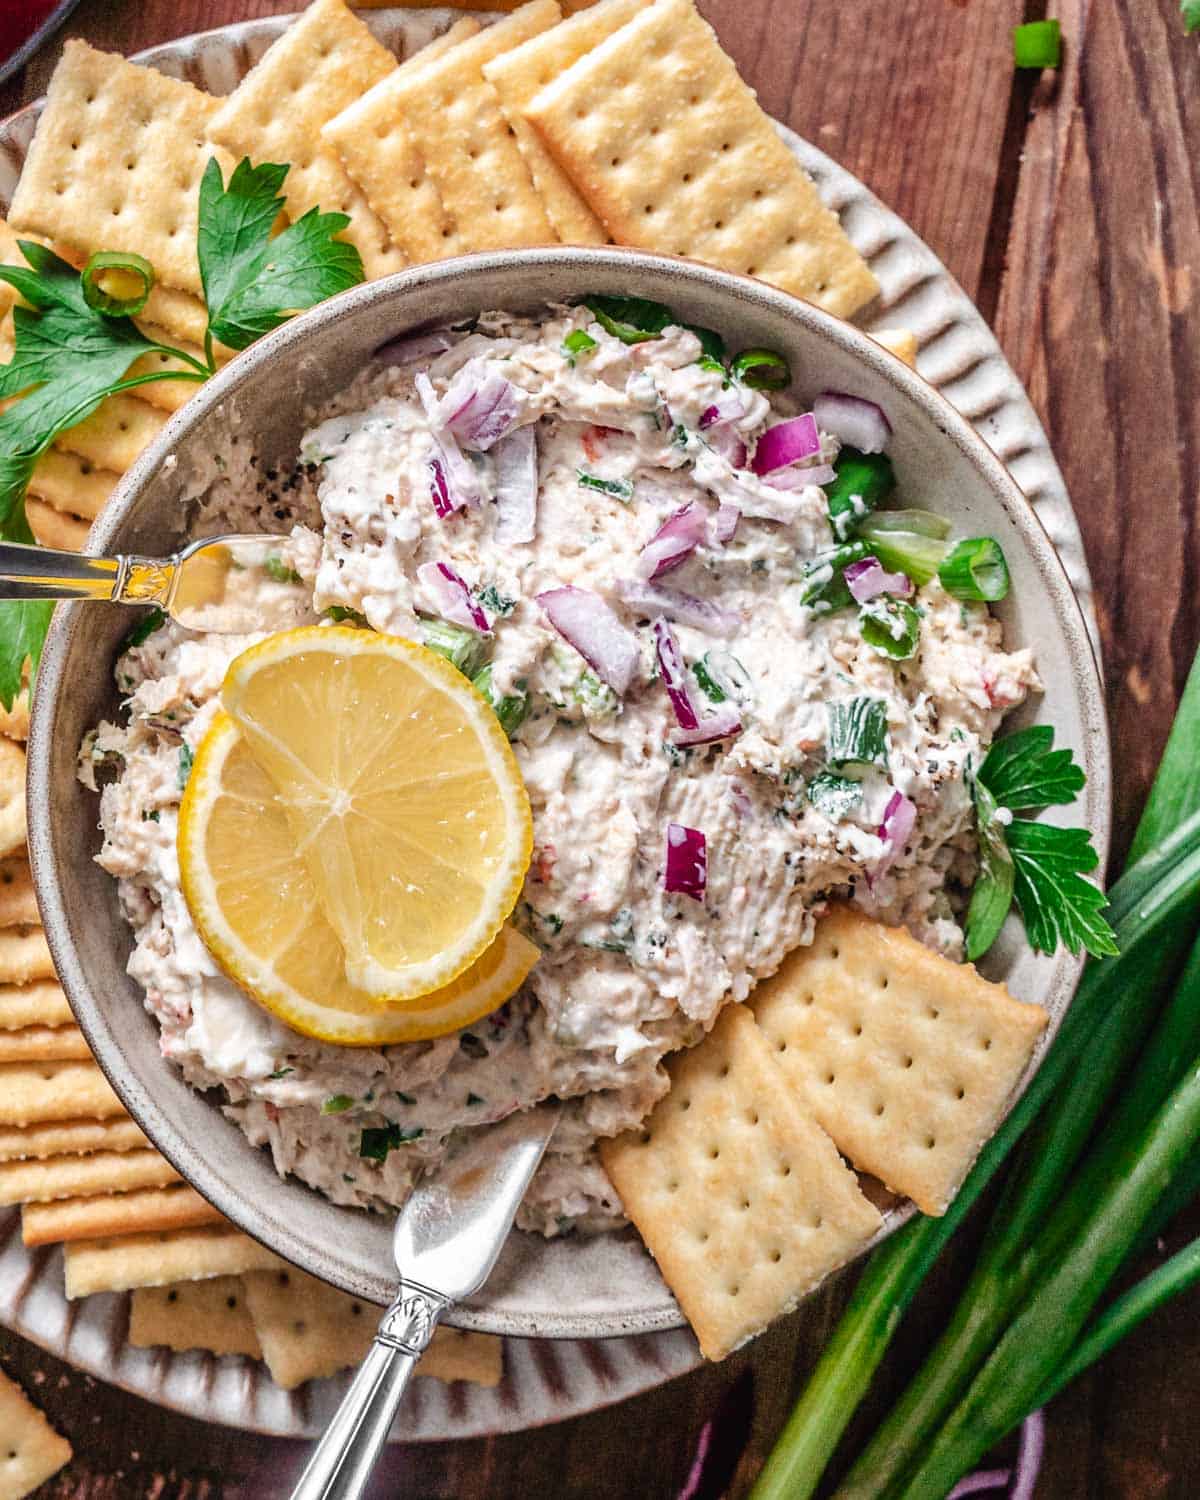 Florida fish dip with crackers and lemon slices.